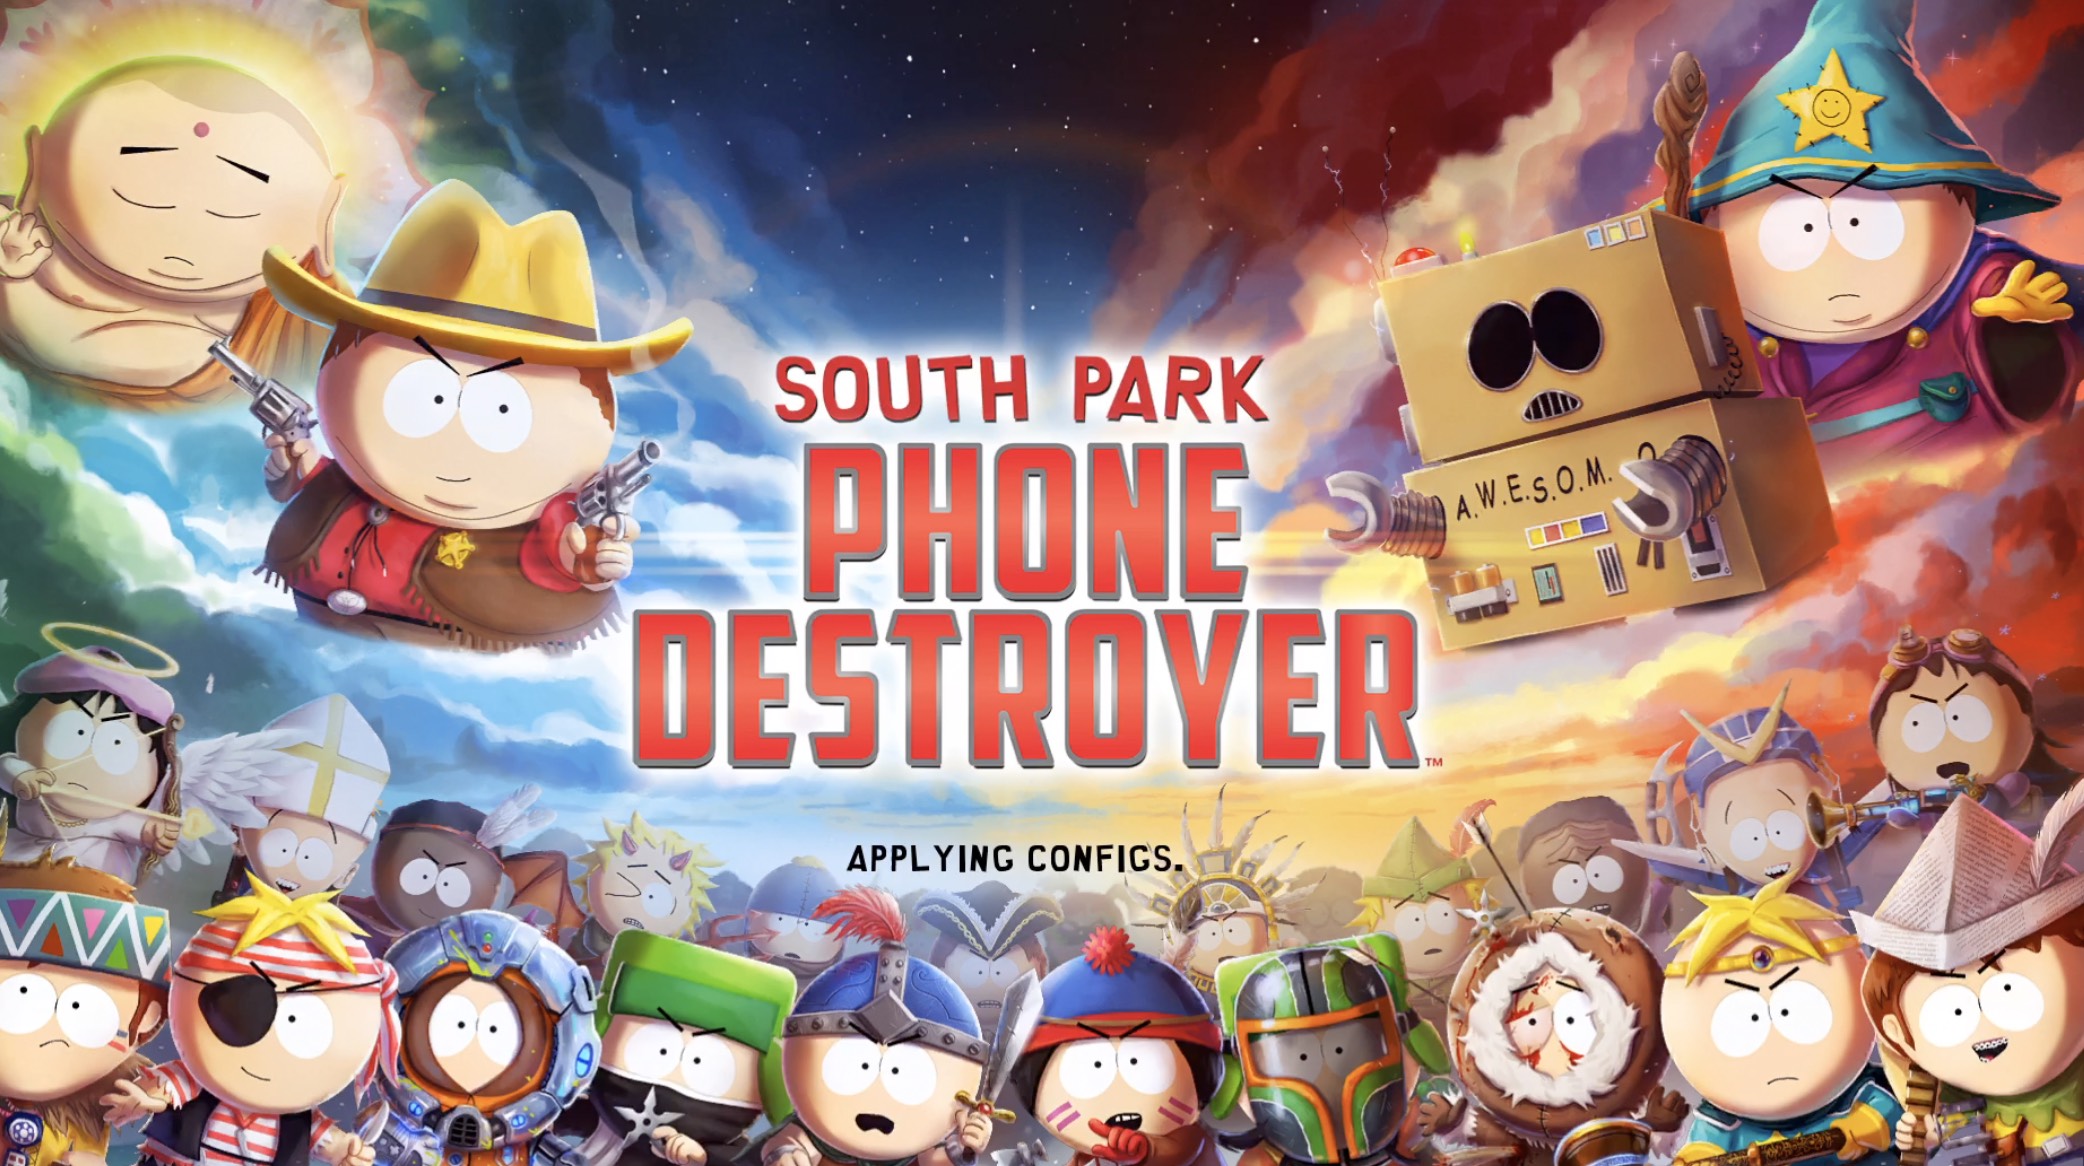 Review—South Park: Phone Destroyer